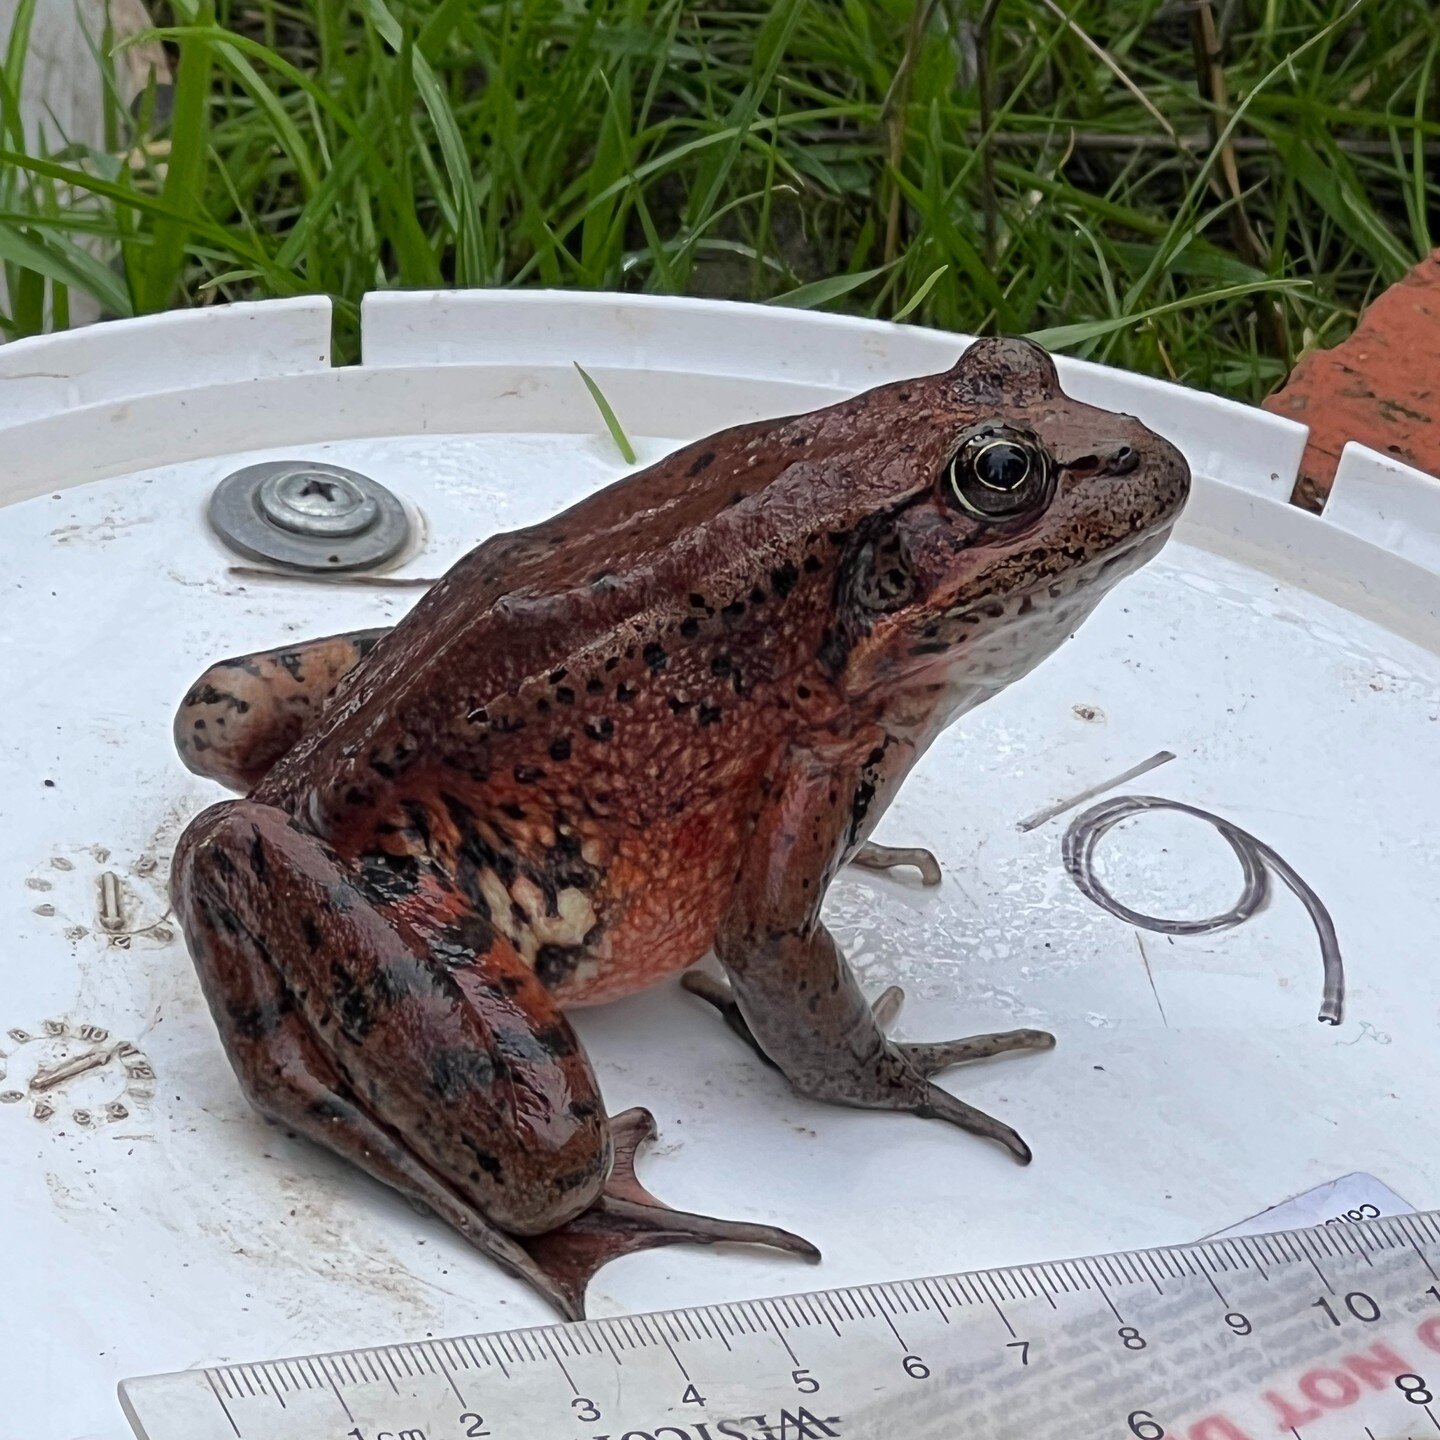 Pax Biologists have been participating in California red-legged frog (Rana draytonii) training workshops with permitted biologists to enhance their identification skills and protocol-level survey experience. The California red-legged frog is federall